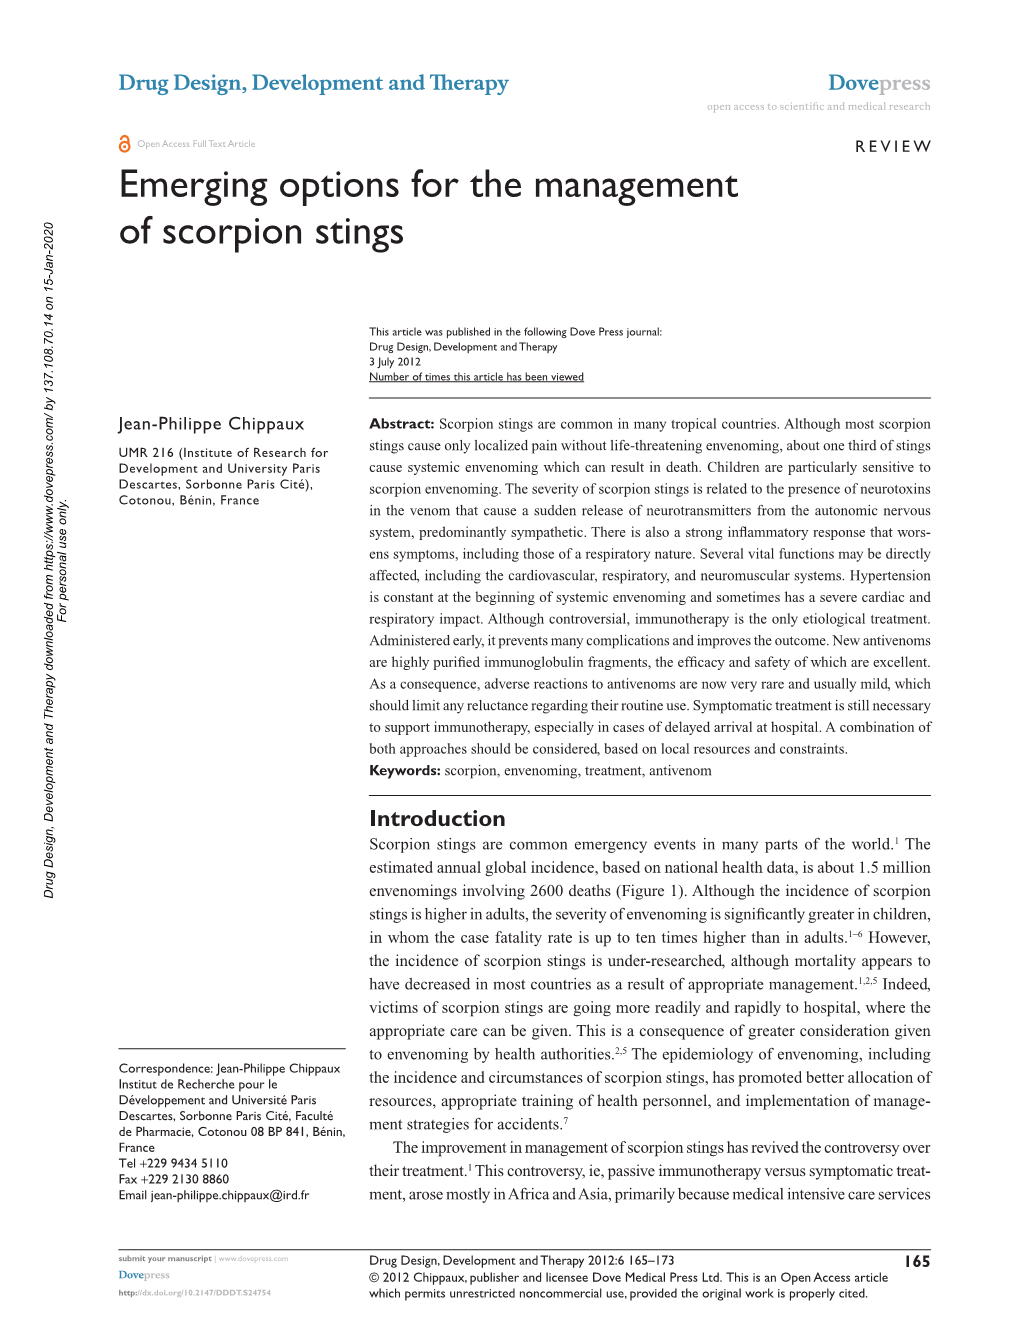 Emerging Options for the Management of Scorpion Stings